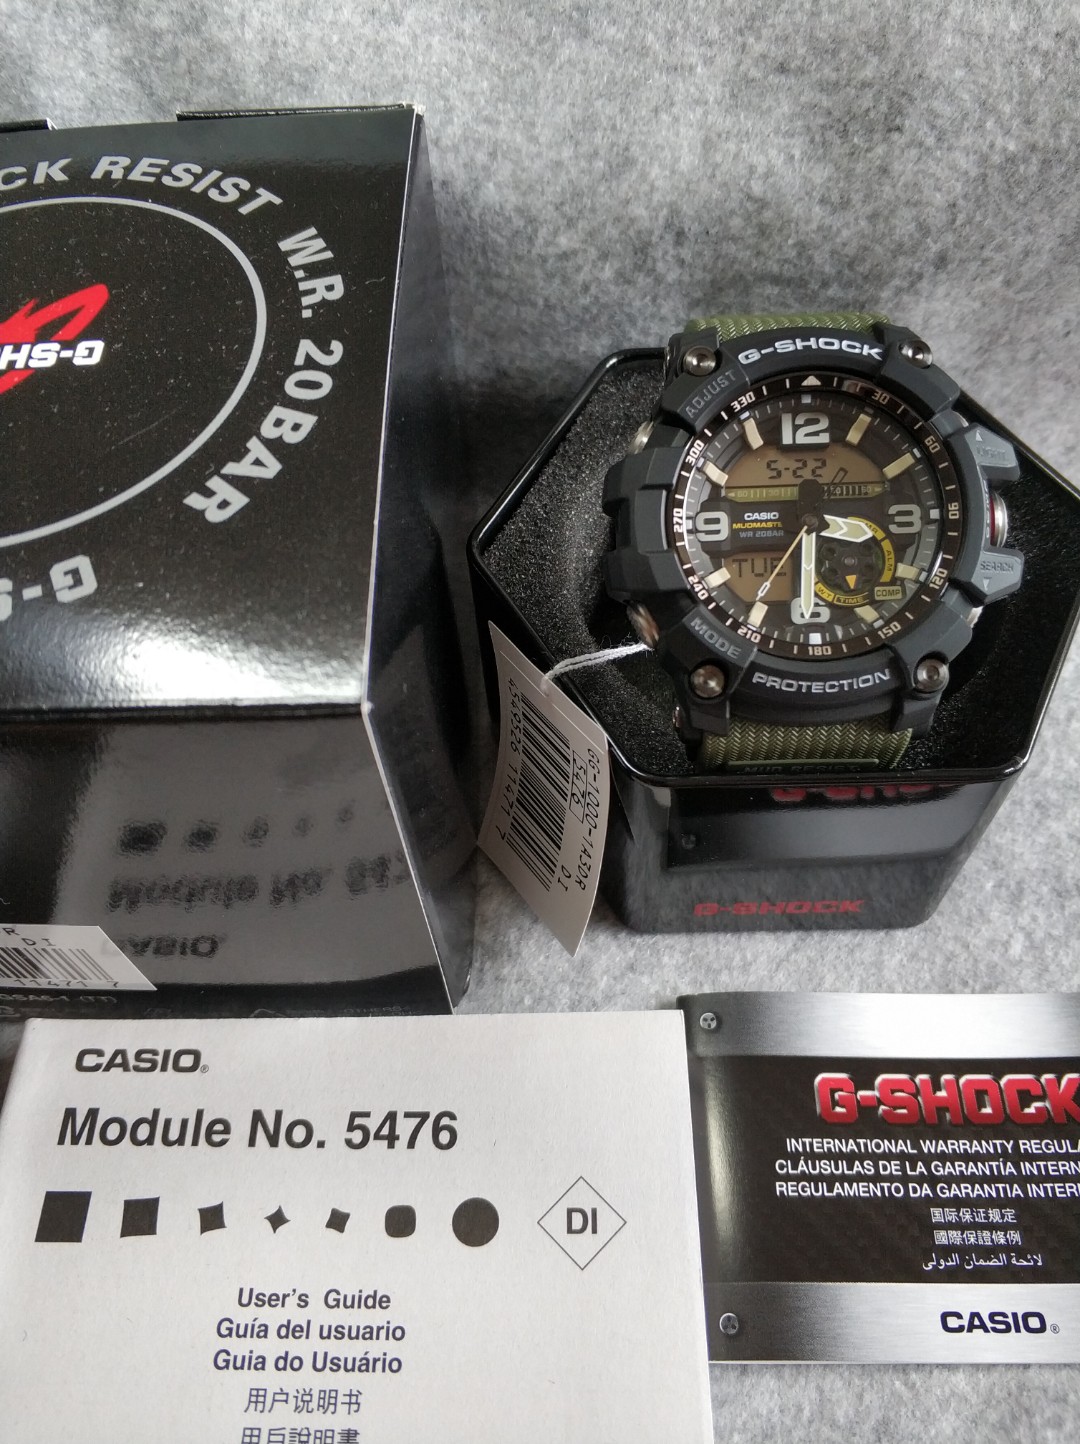 Casio G Shock Gg 1000 1a3dr Gg 1000 1a3d Gg 1000 1a3 Gg 1000 Men S Fashion Watches On Carousell